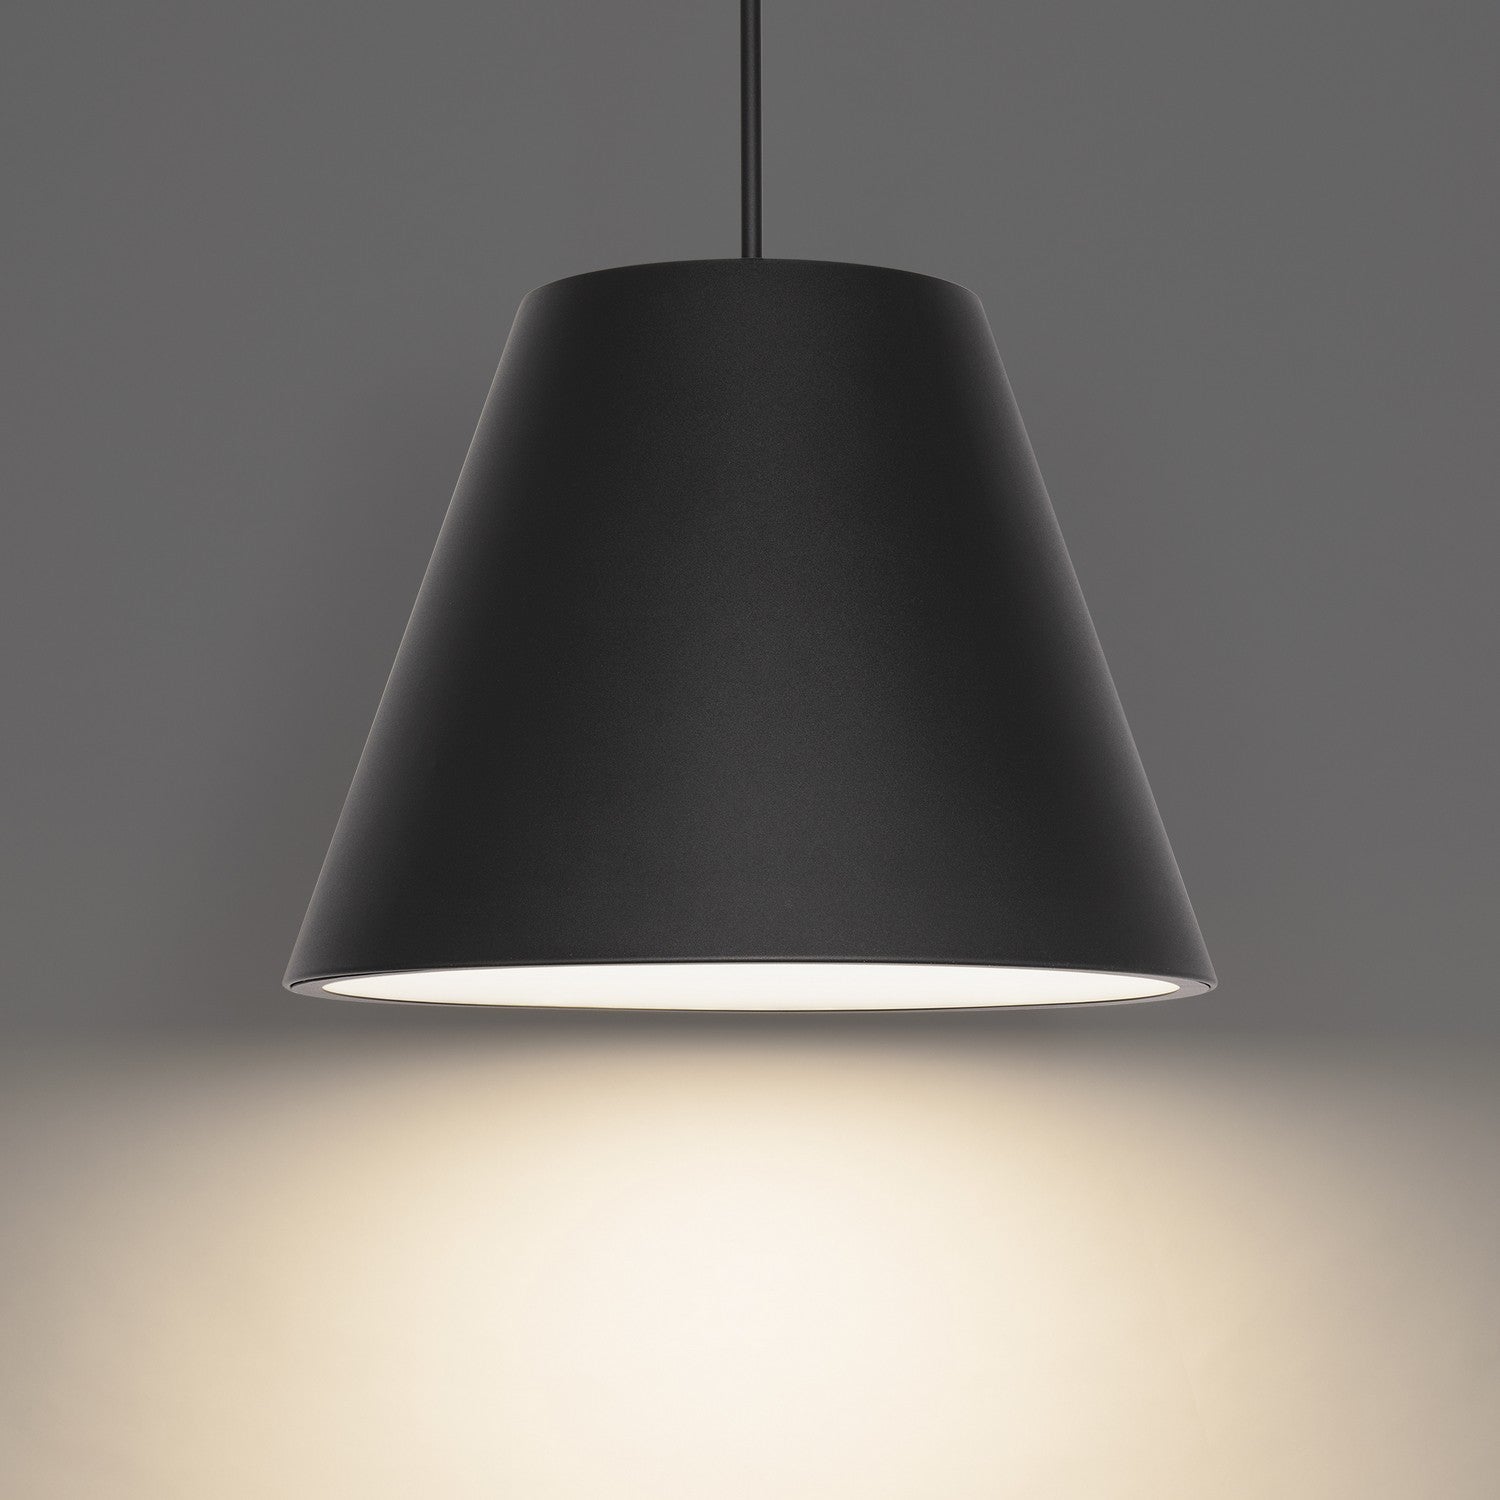 Modern Forms Canada - PD-W24320-30-BK - LED Outdoor Pendant - Myla - Black